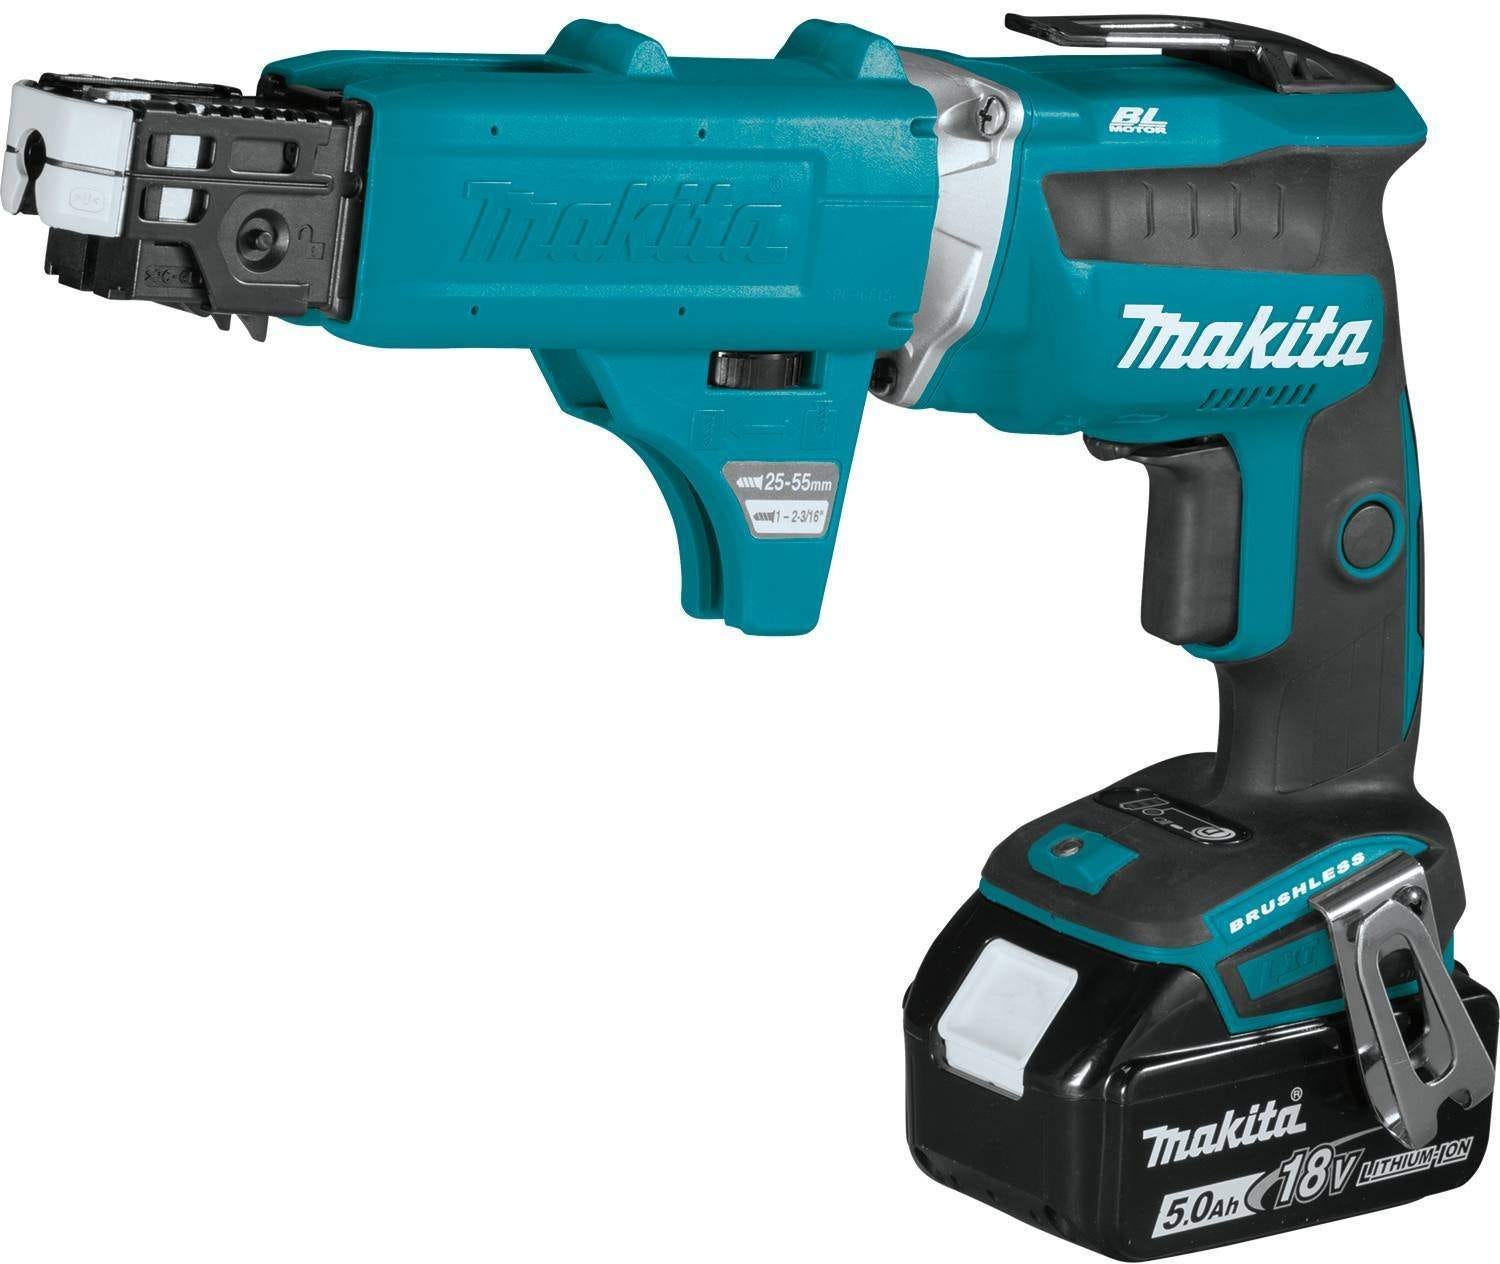 Makita XT255TX2 18V LXT Lithium-Ion Cordless 2-Pc 5.0Ah Combo Kit with Collated Autofeed Screwdriver Magazine